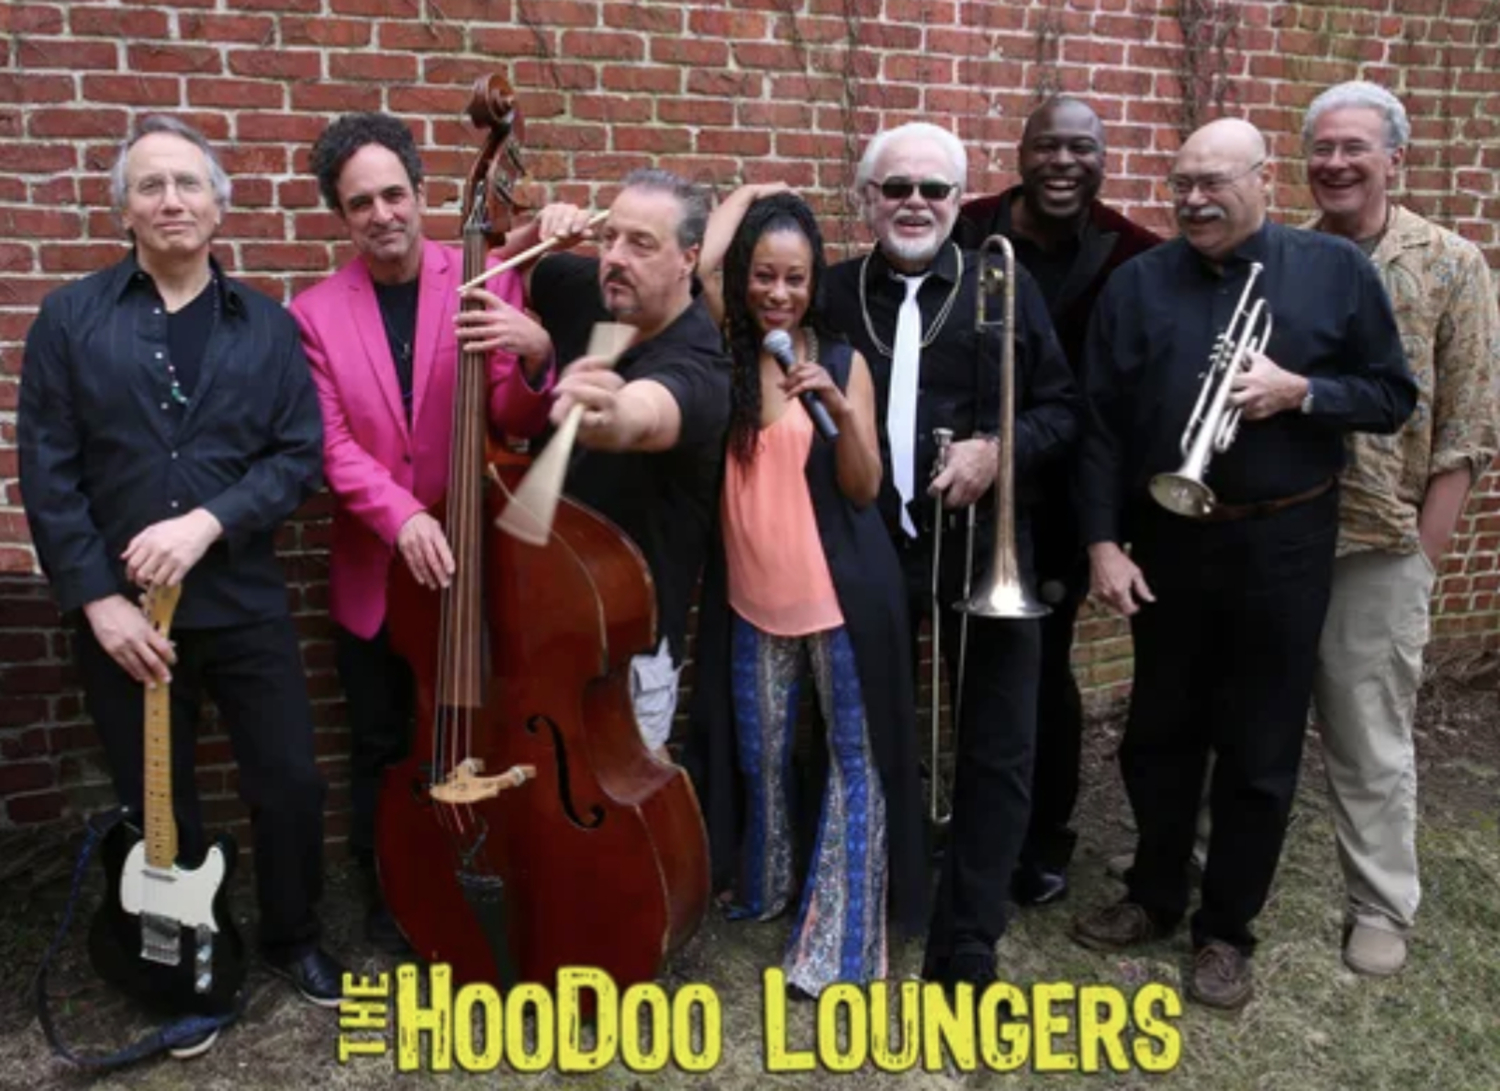 The HooDoo Loungers. COURTESY BAY STREET THEATER